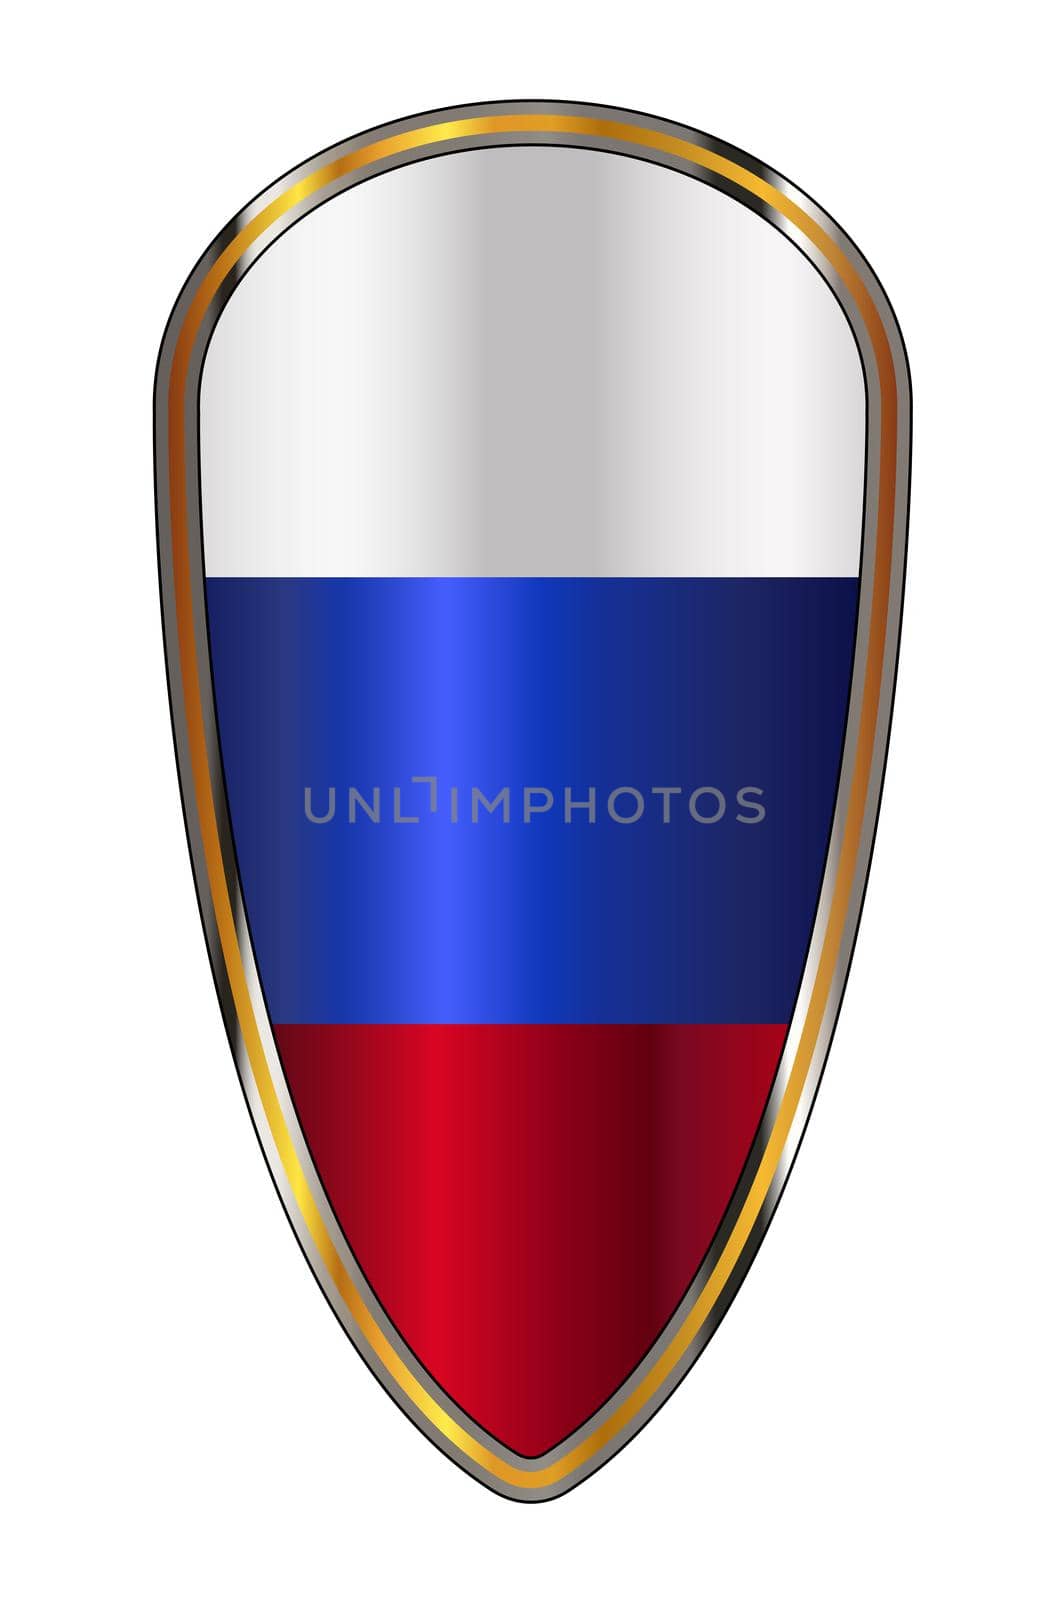 The traditional knights shield associated with a crusader with the Russian red white and blue flag